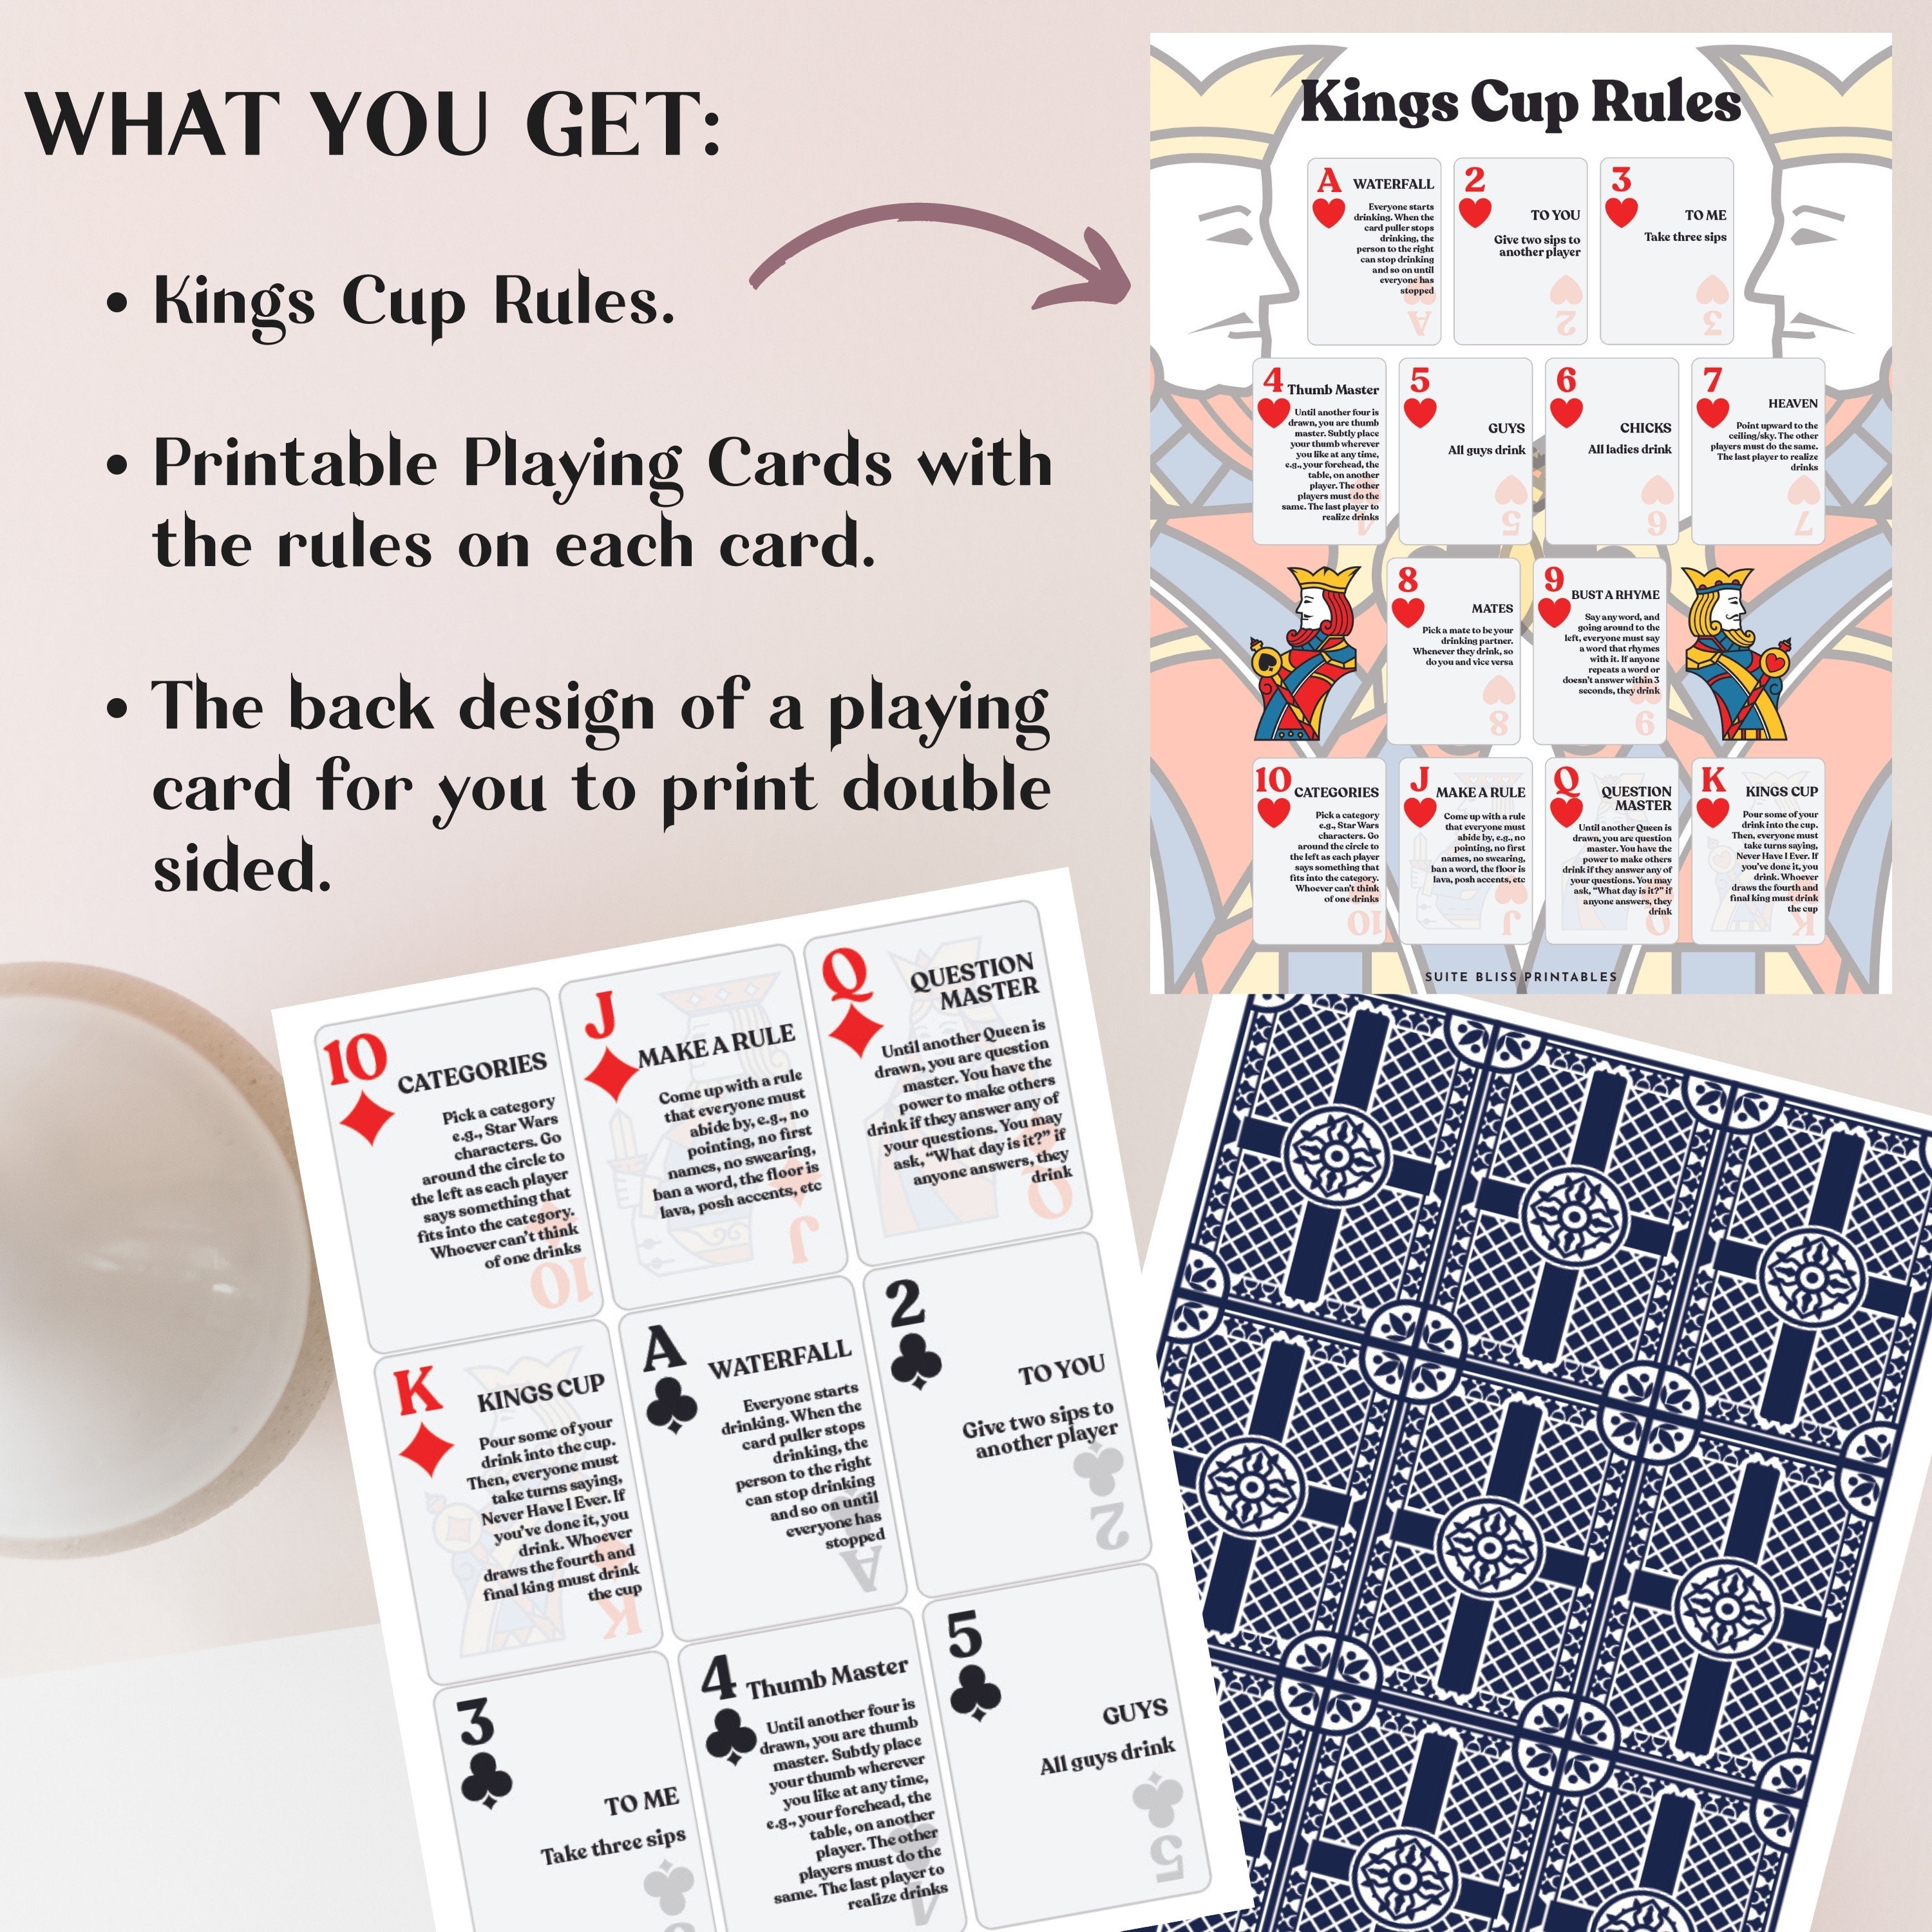 Kings Cup Rules & Playing Cards. Printable Drinking Games for Parties,  Bachelorette Games, Bridal Shower Games, and Bachelor Party Games 